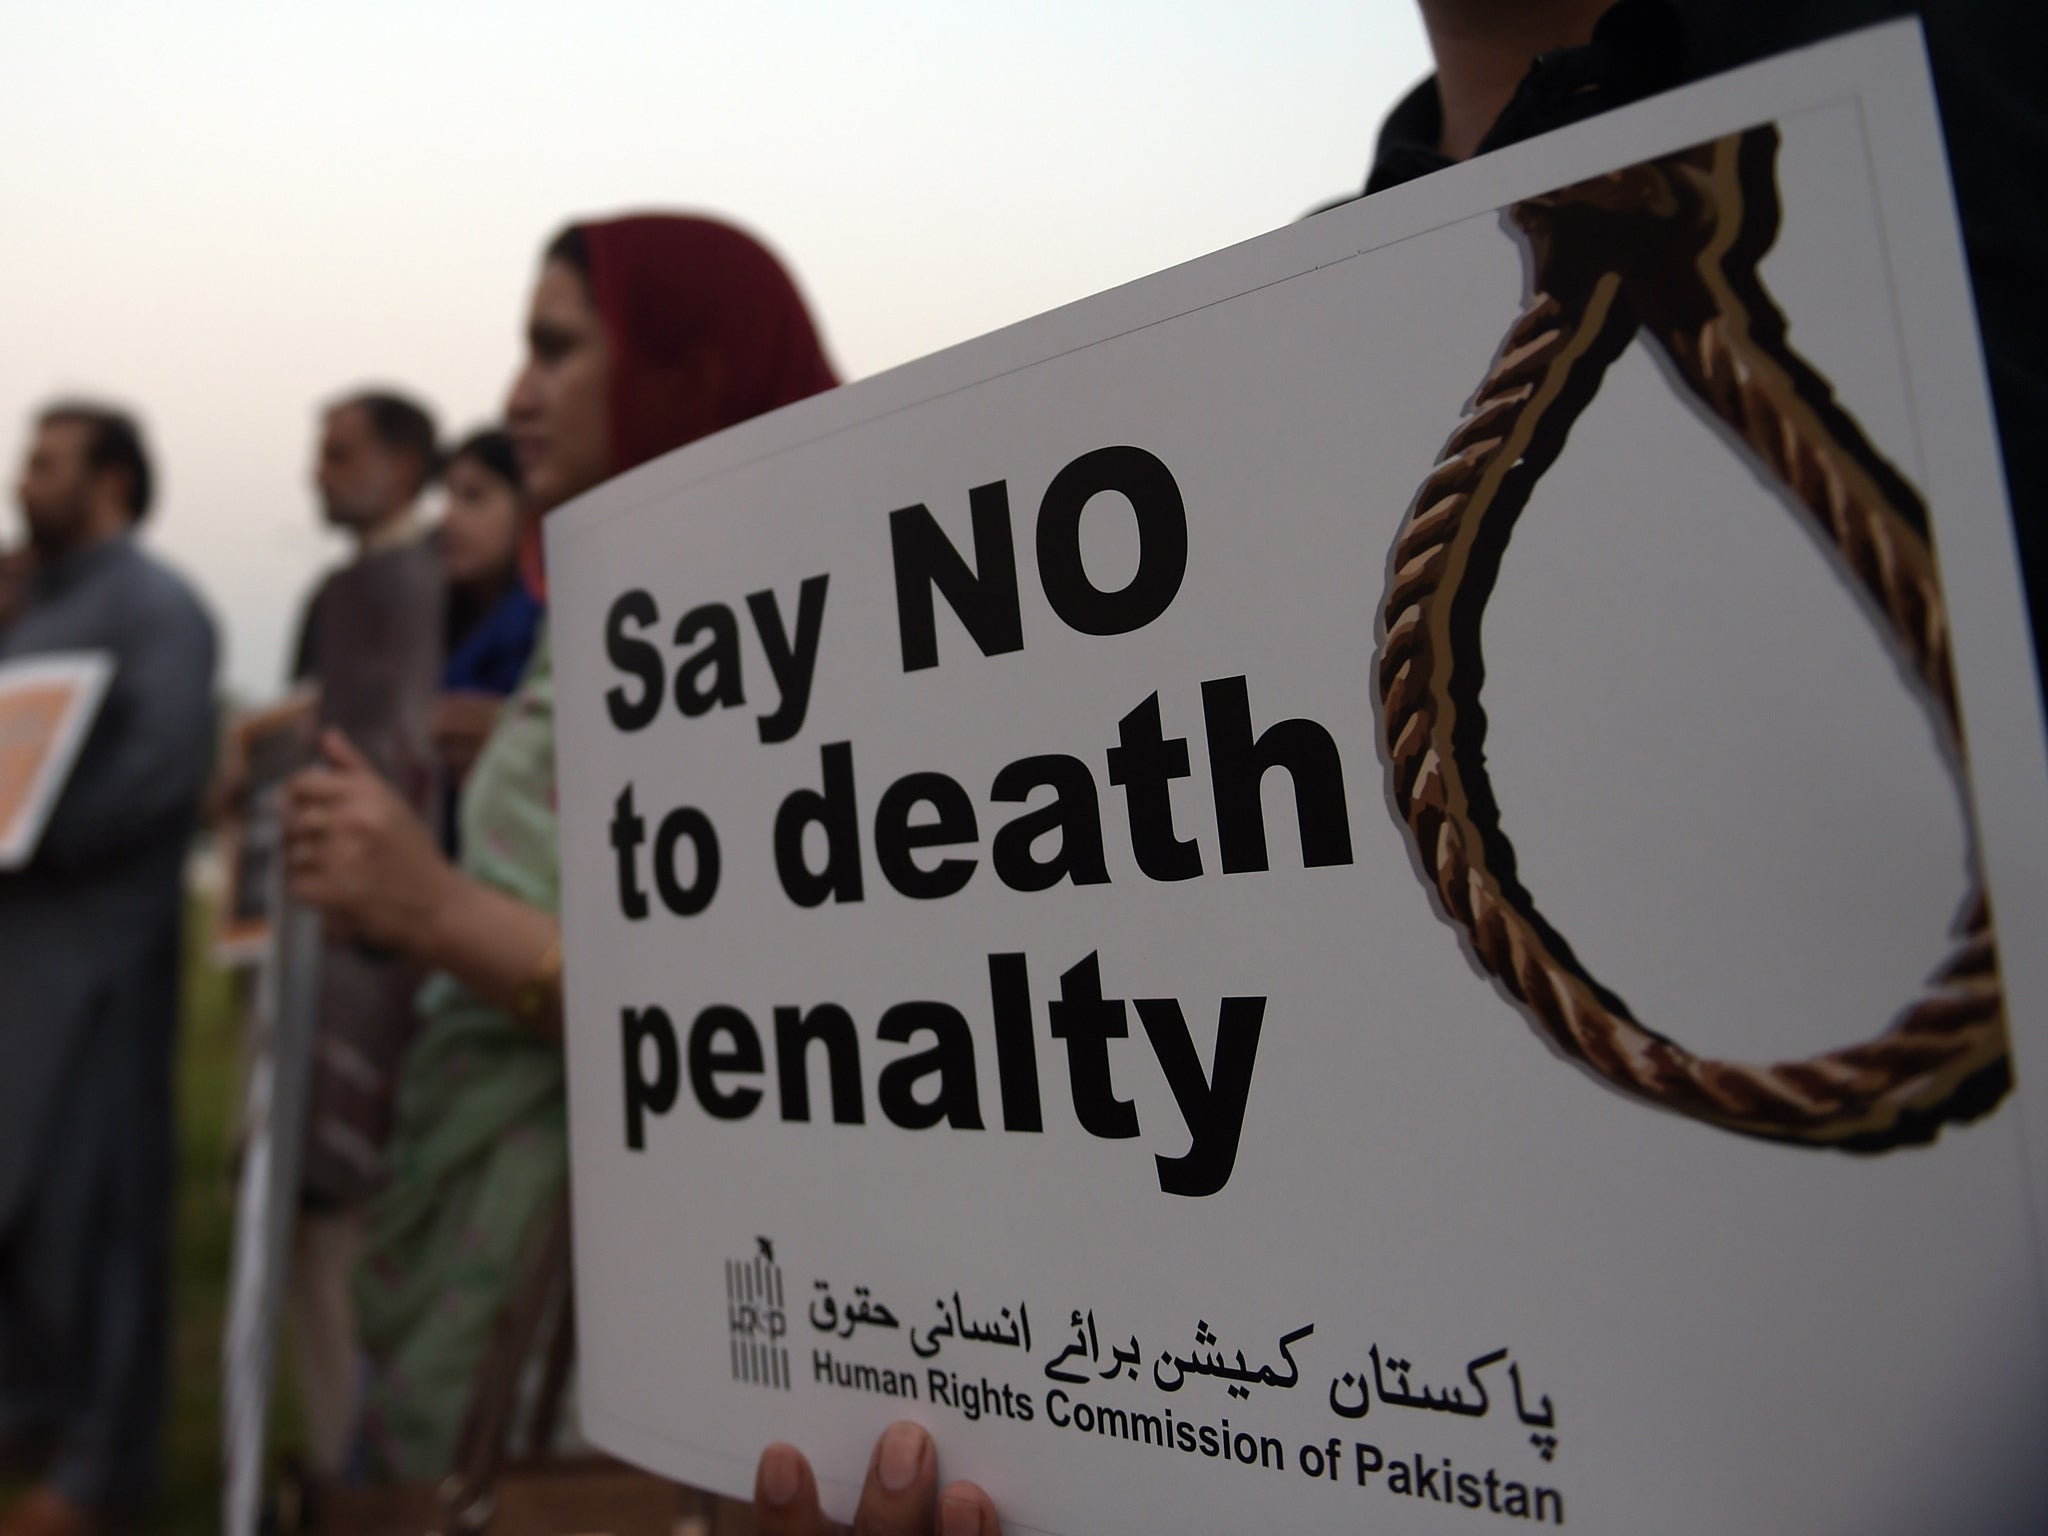 Human rights activists protest death penalty in Pakistan Aamir Qureshi/Getty Images